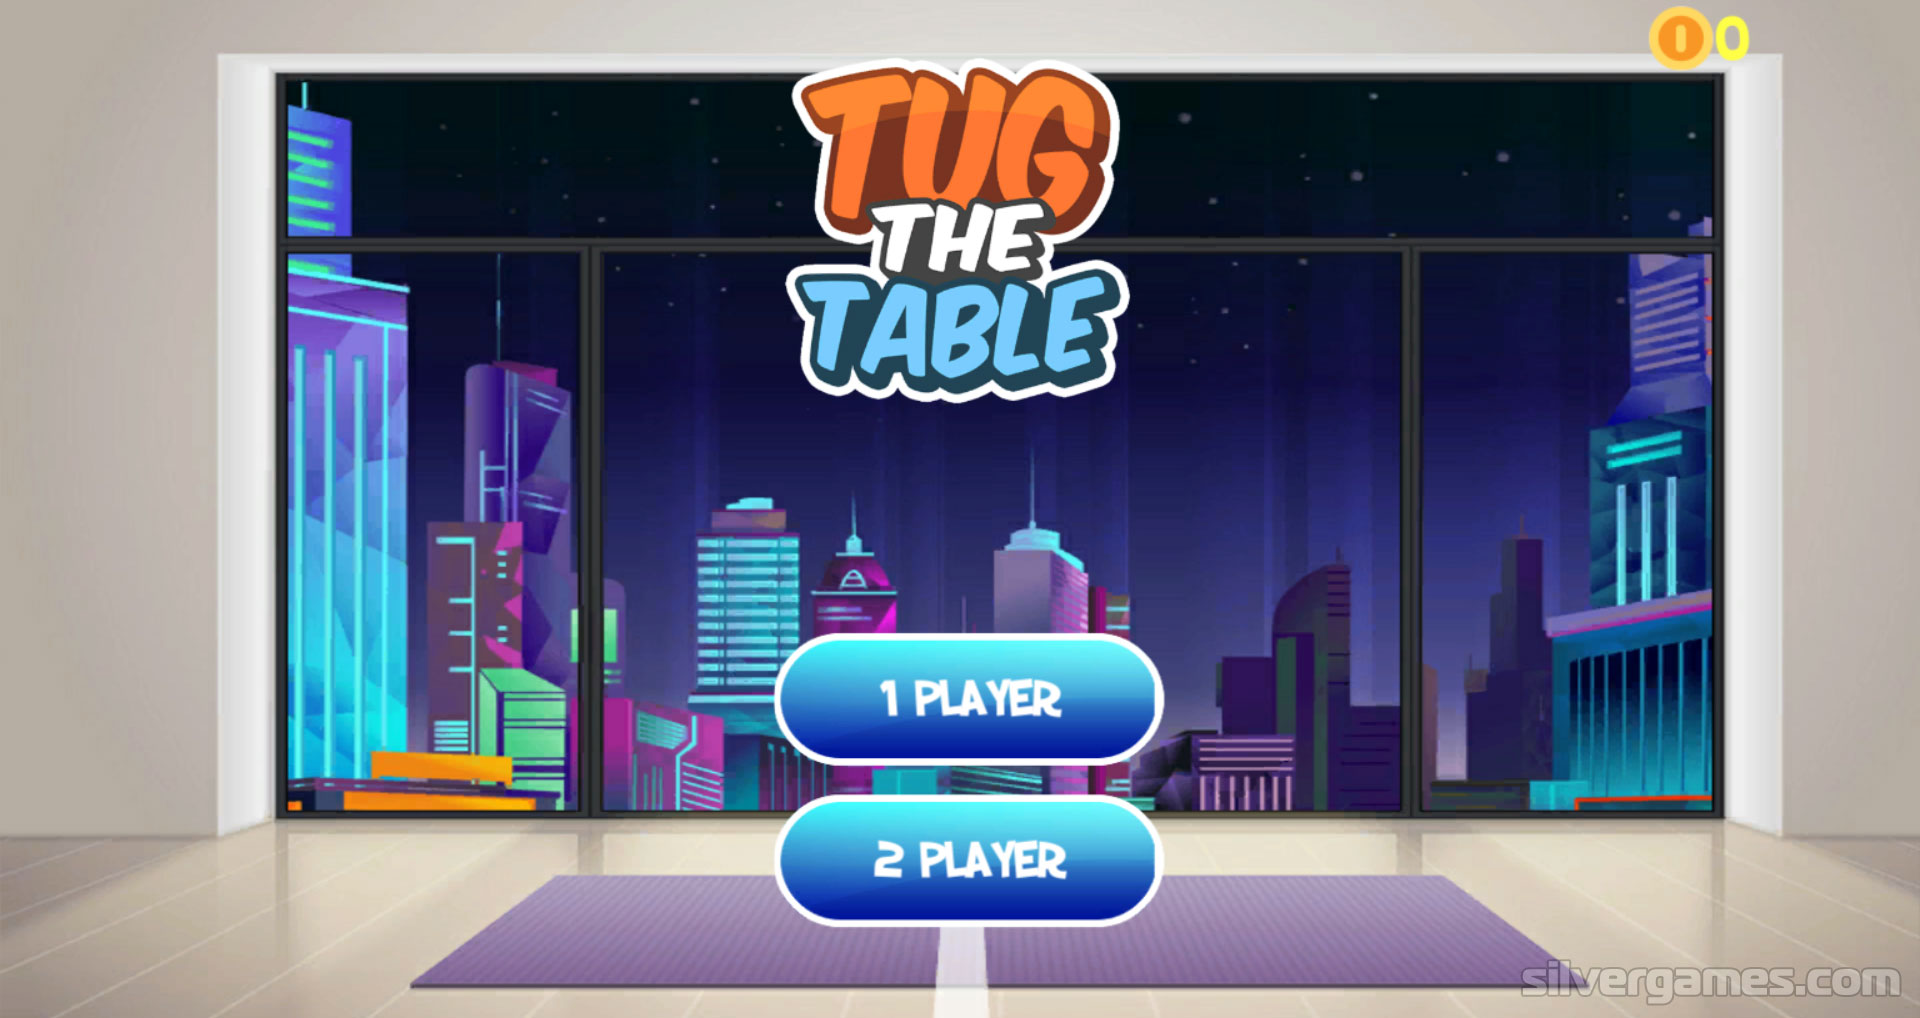 Tug The Table - Play the Best The Table Games Online